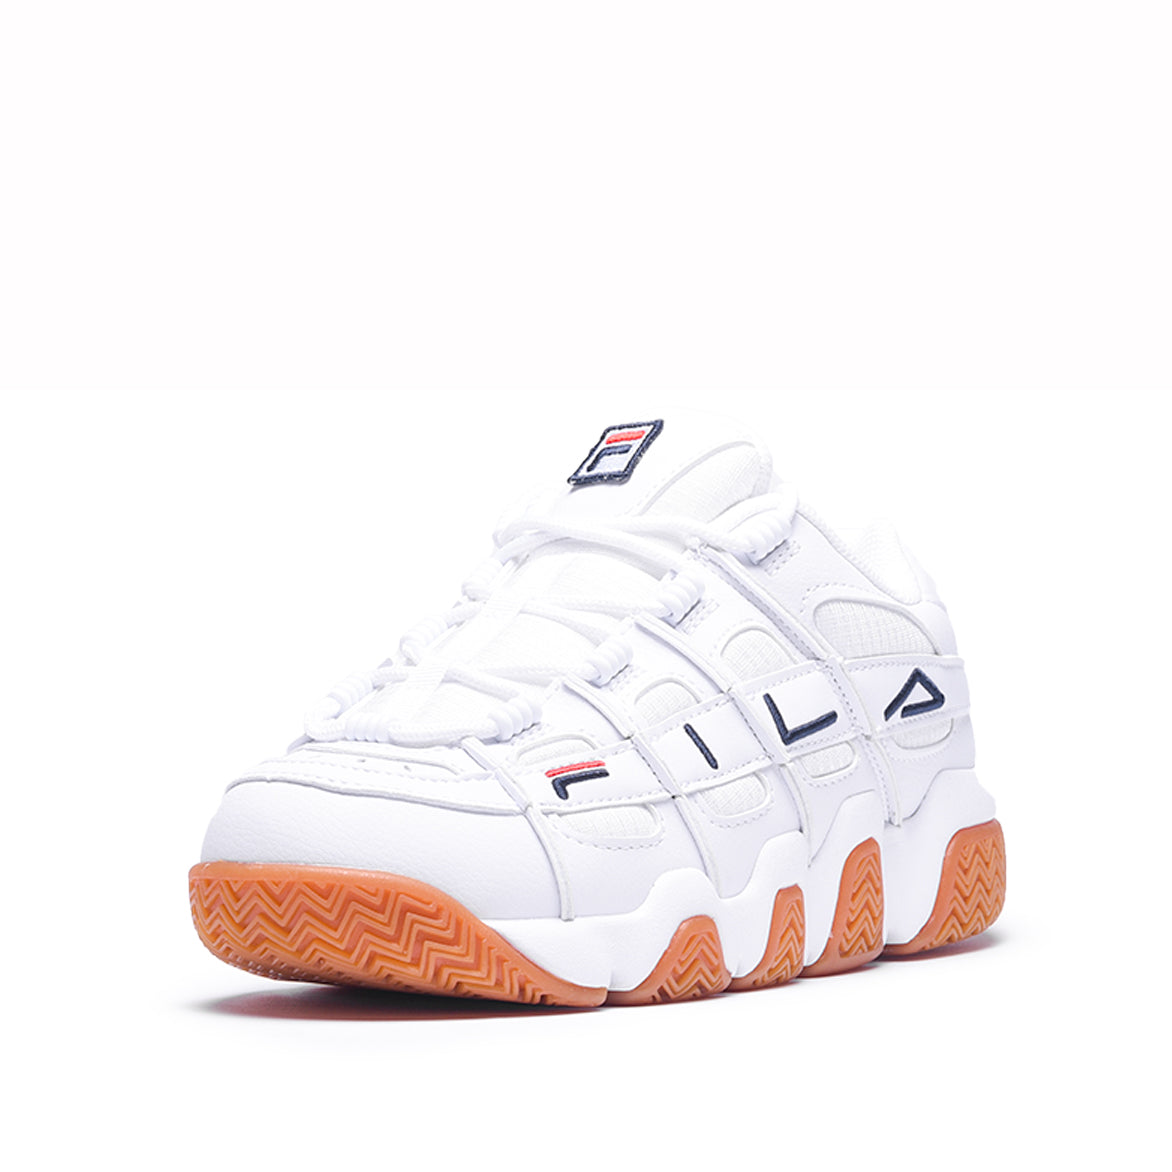 WMNS UPROOT - WHITE / NAVY / GUM